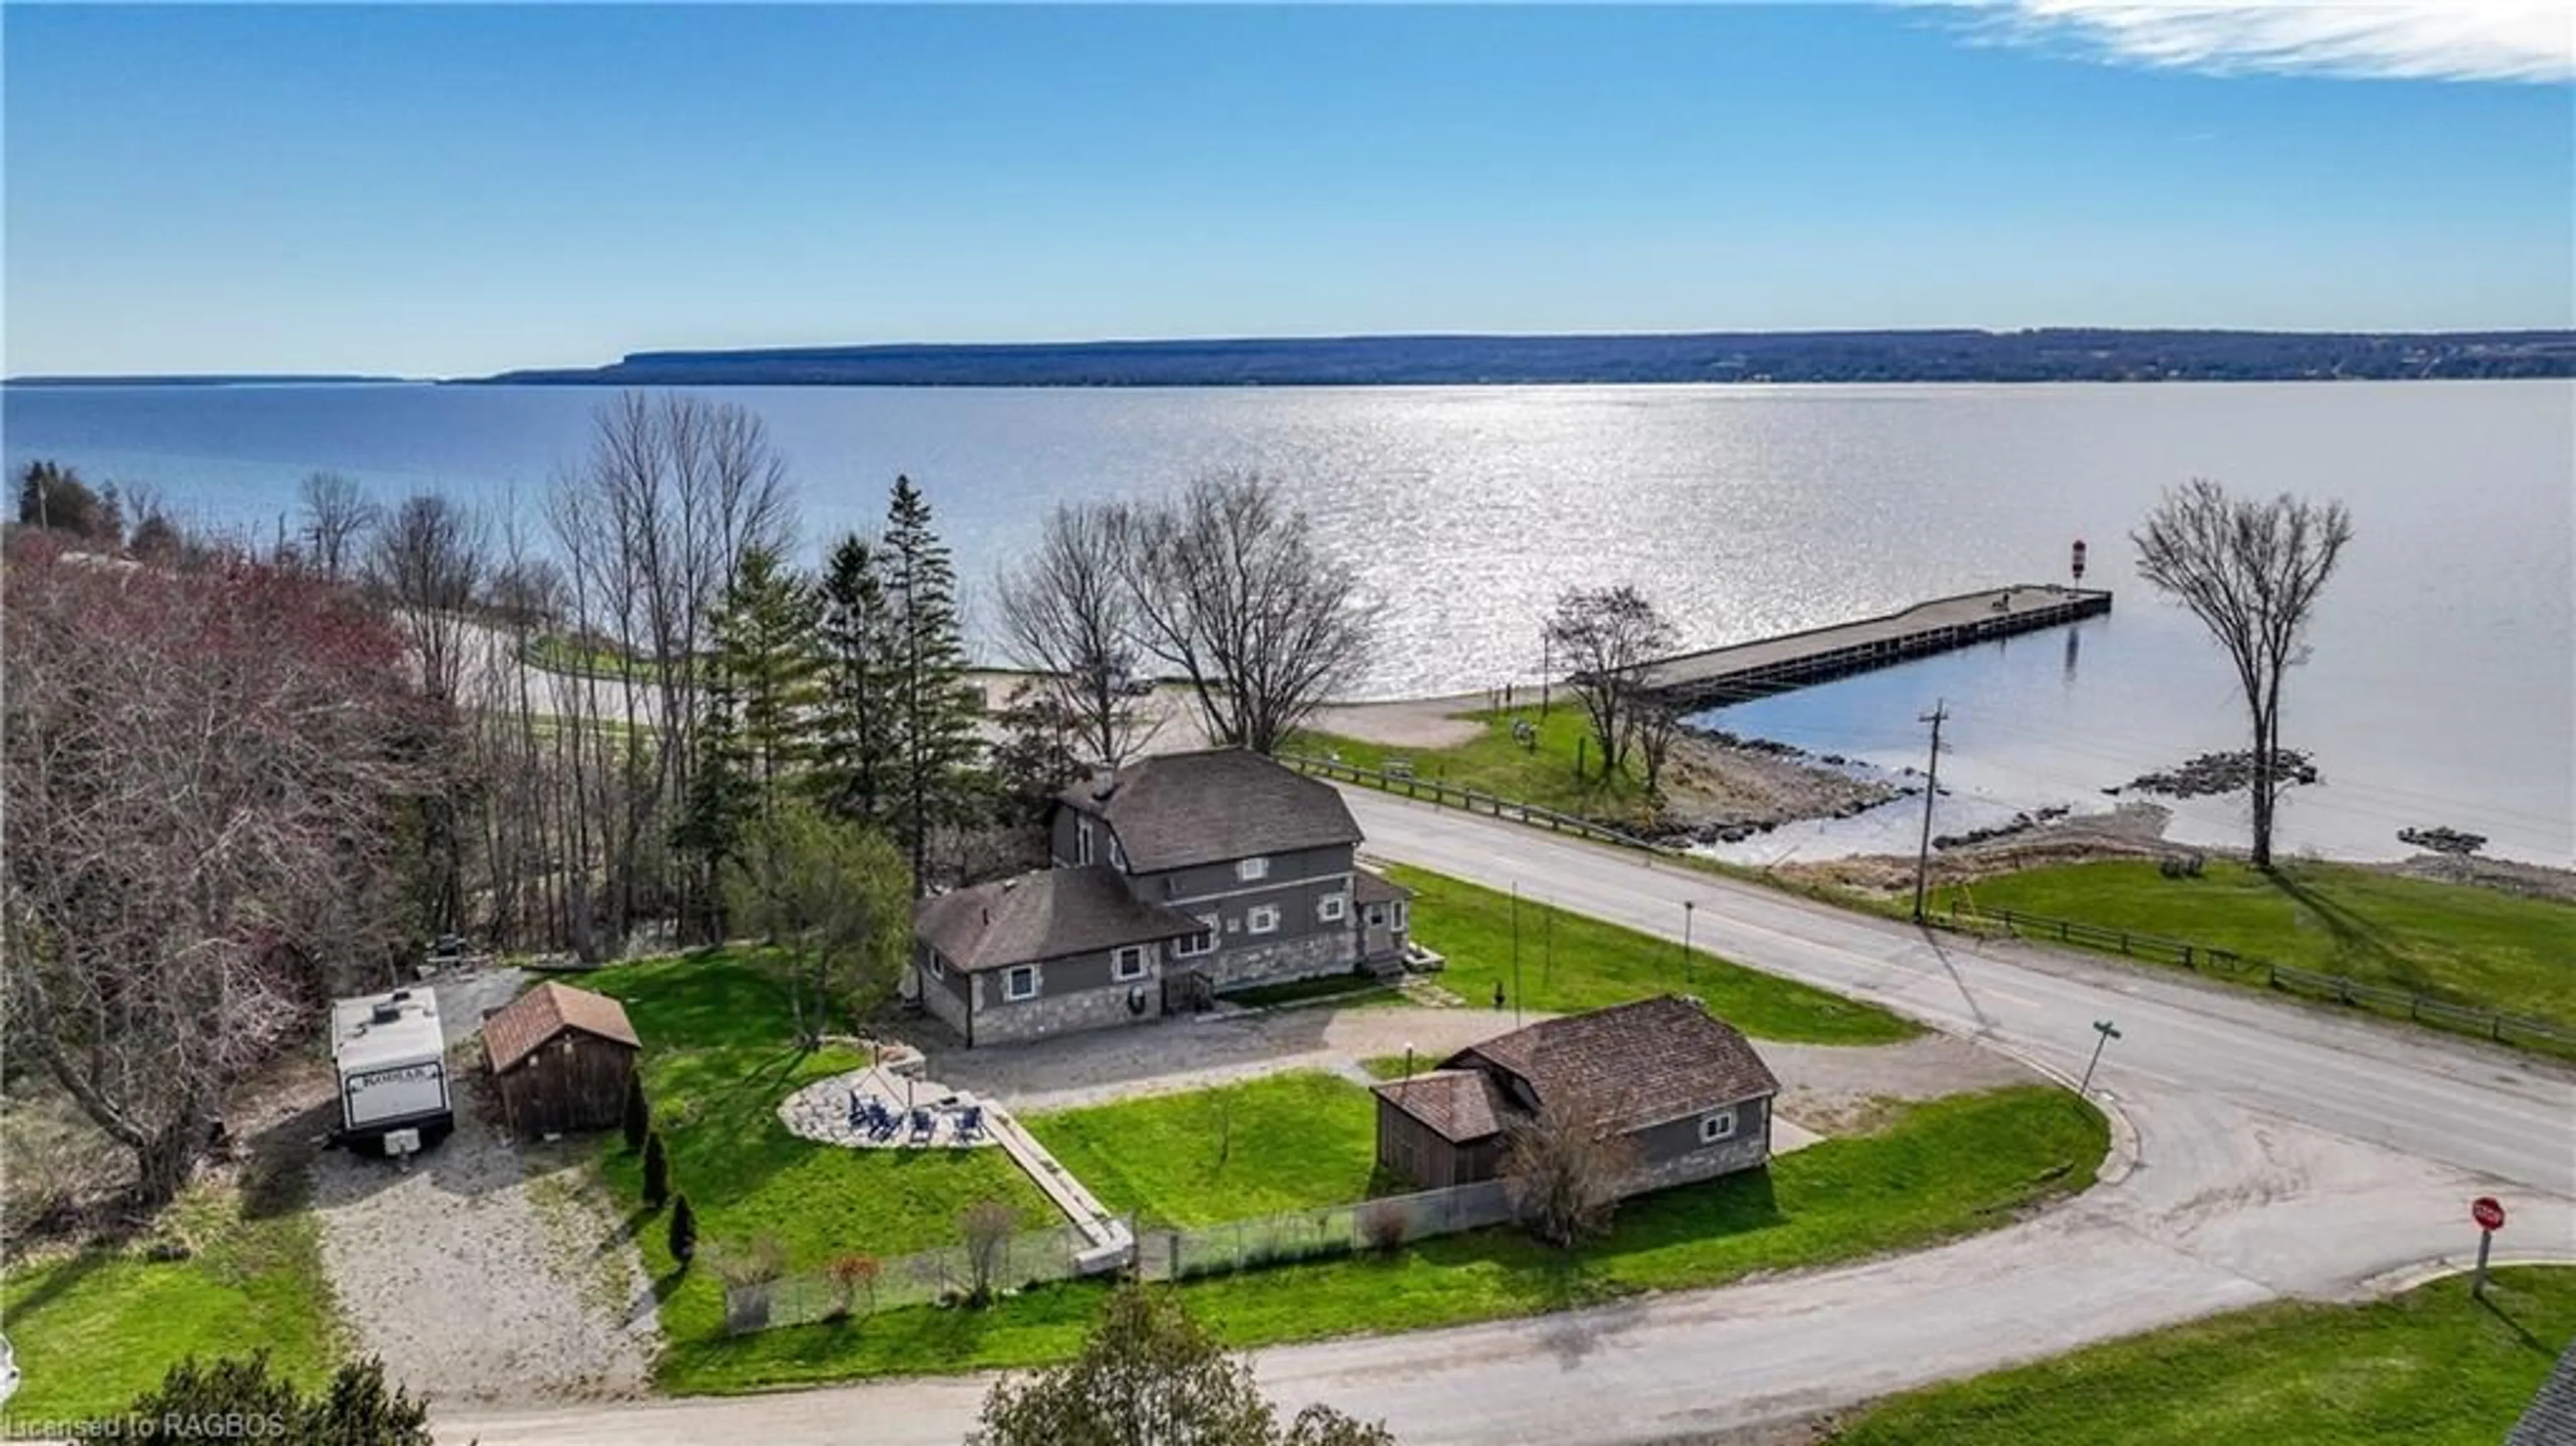 Lakeview for 204 Bruce Rd 9, Colpoy's Bay Ontario N0H 2T0